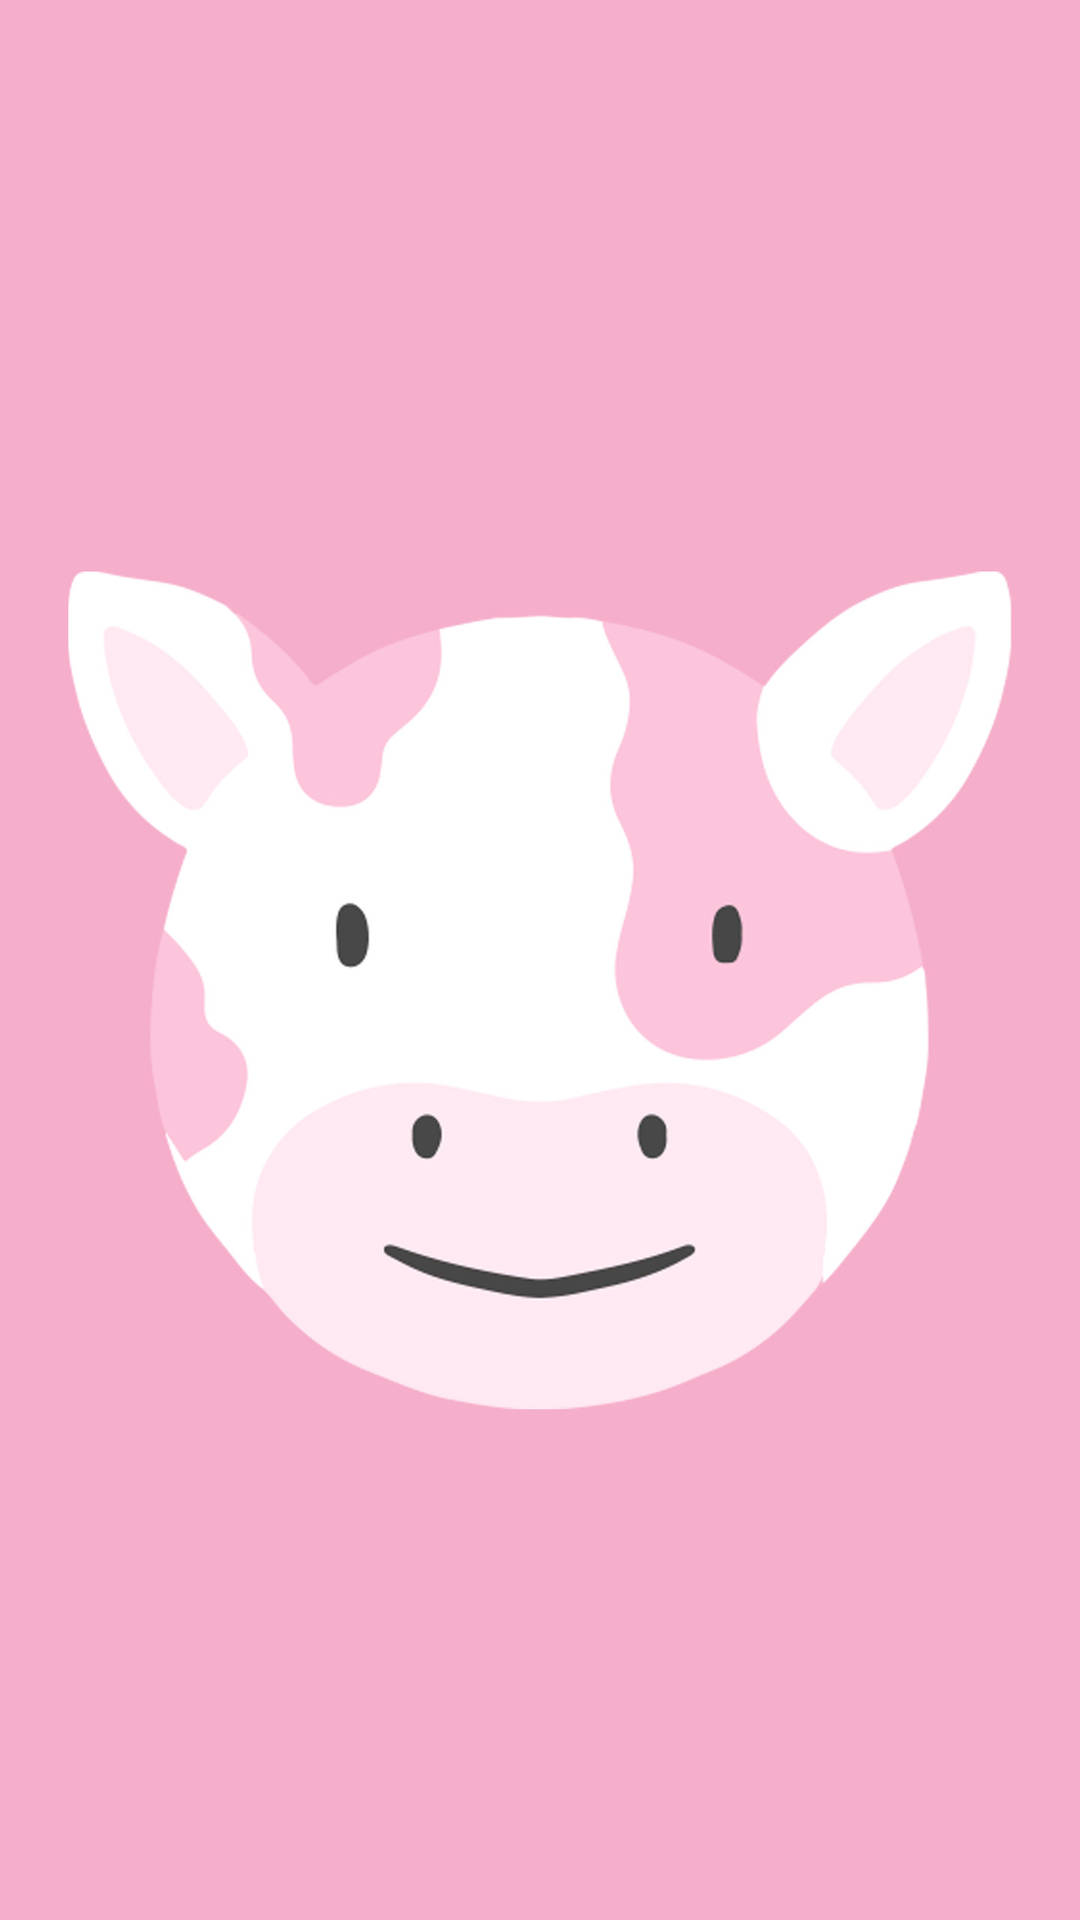 Adorable Strawberry Cow with Innocent Expressions Wallpaper